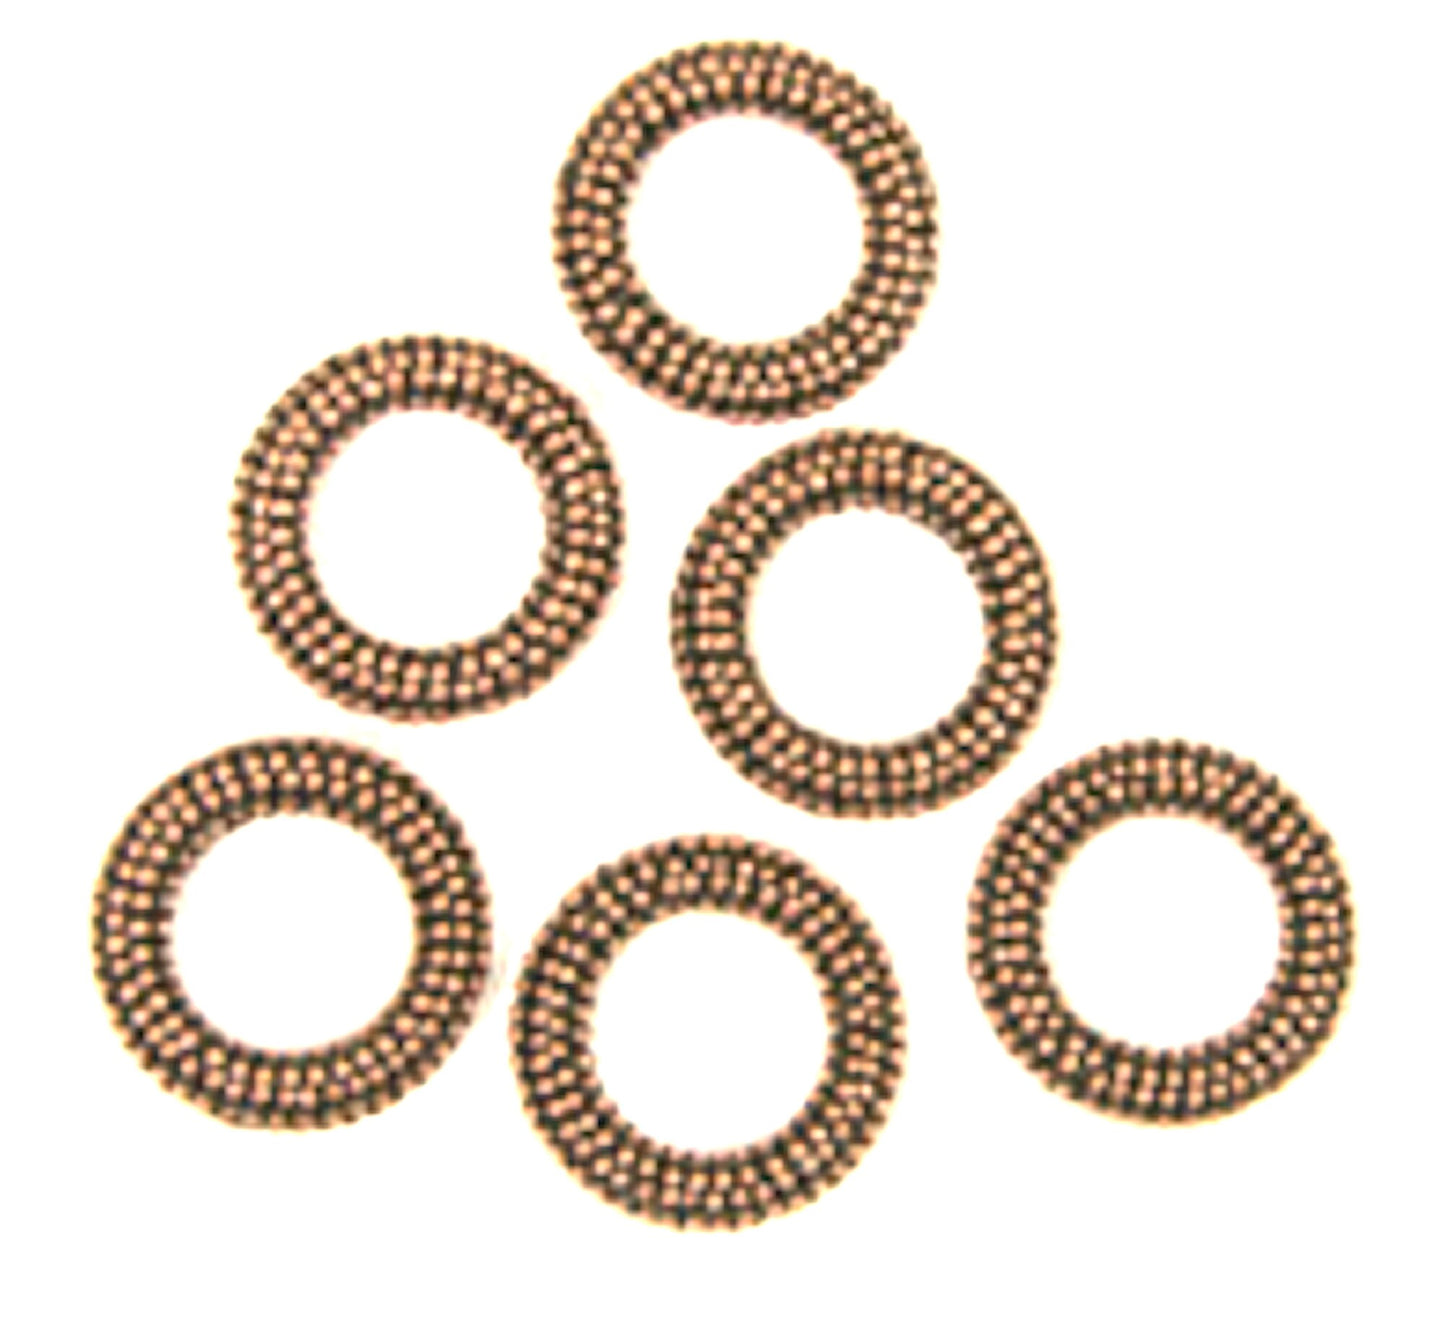 23mm Vintage Hoop Granulated Beads, Round Connector w/19mm center, Classic Silver or Antique Copper, pack of 12